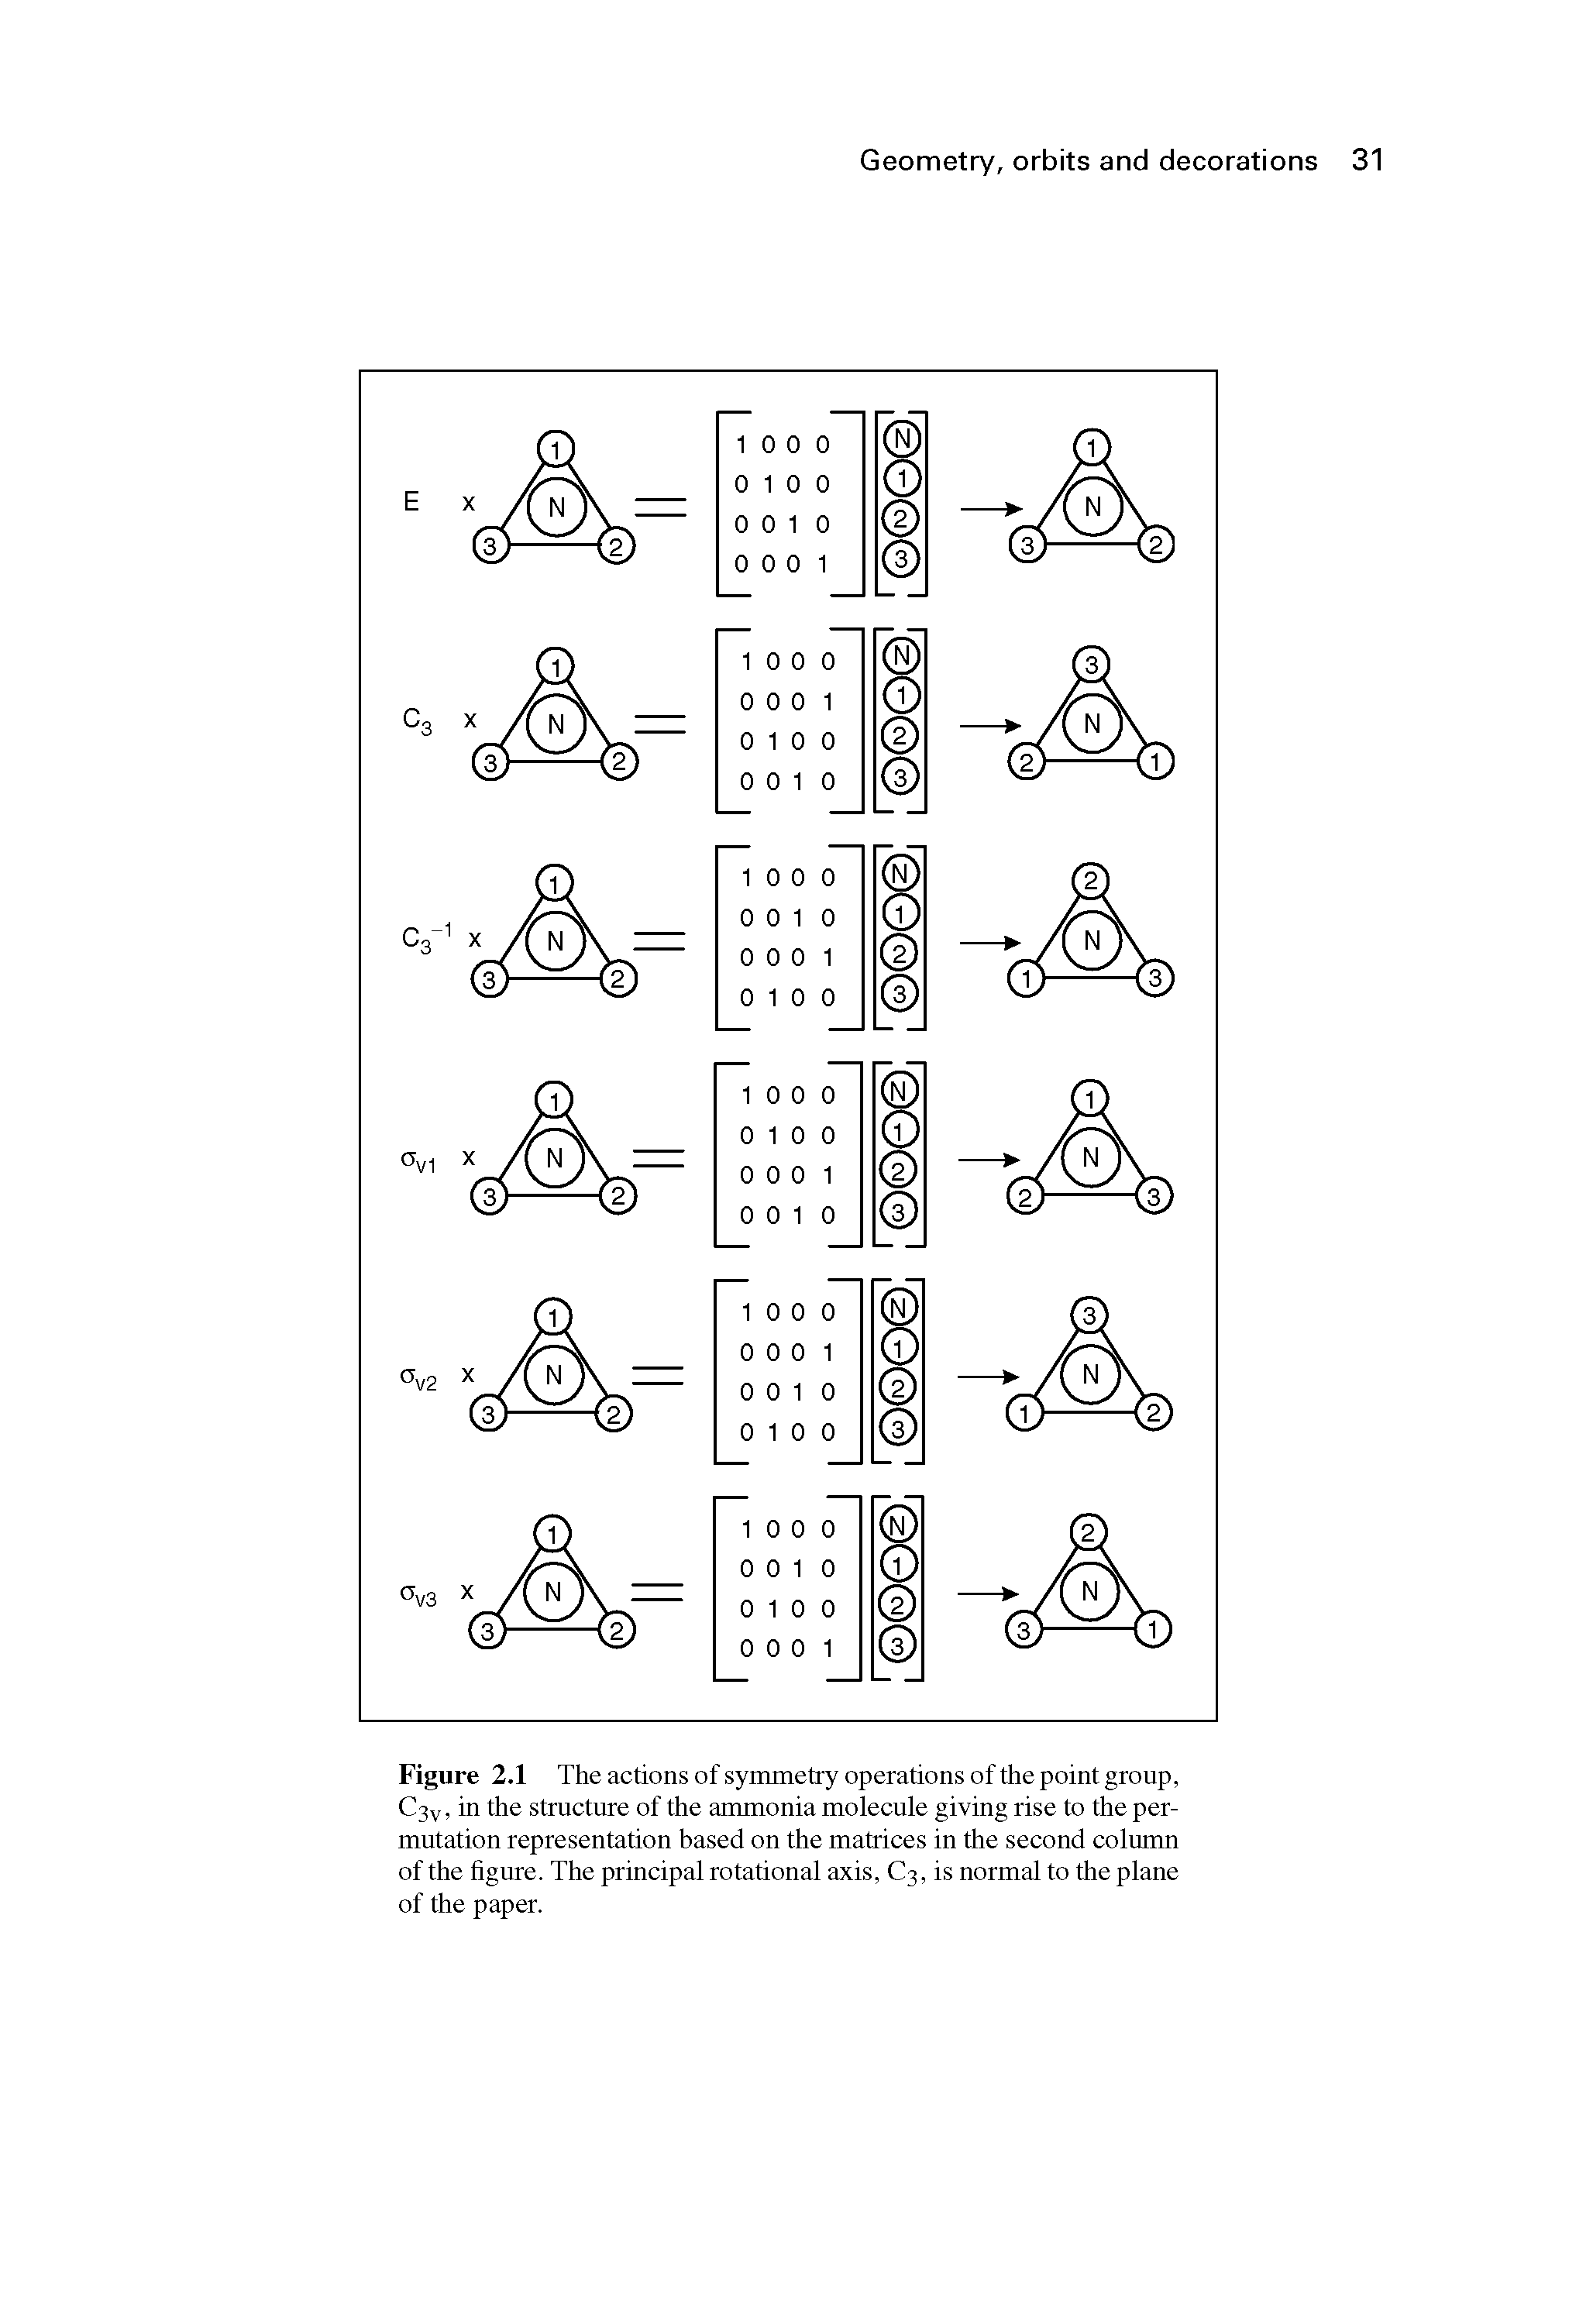 Figure 2.1 The actions of symmetry operations of the point group, C3V, in the structure of the ammonia molecule giving rise to the permutation representation based on the matrices in the second column of the figure. The principal rotational axis, C3, is normal to the plane of the paper.